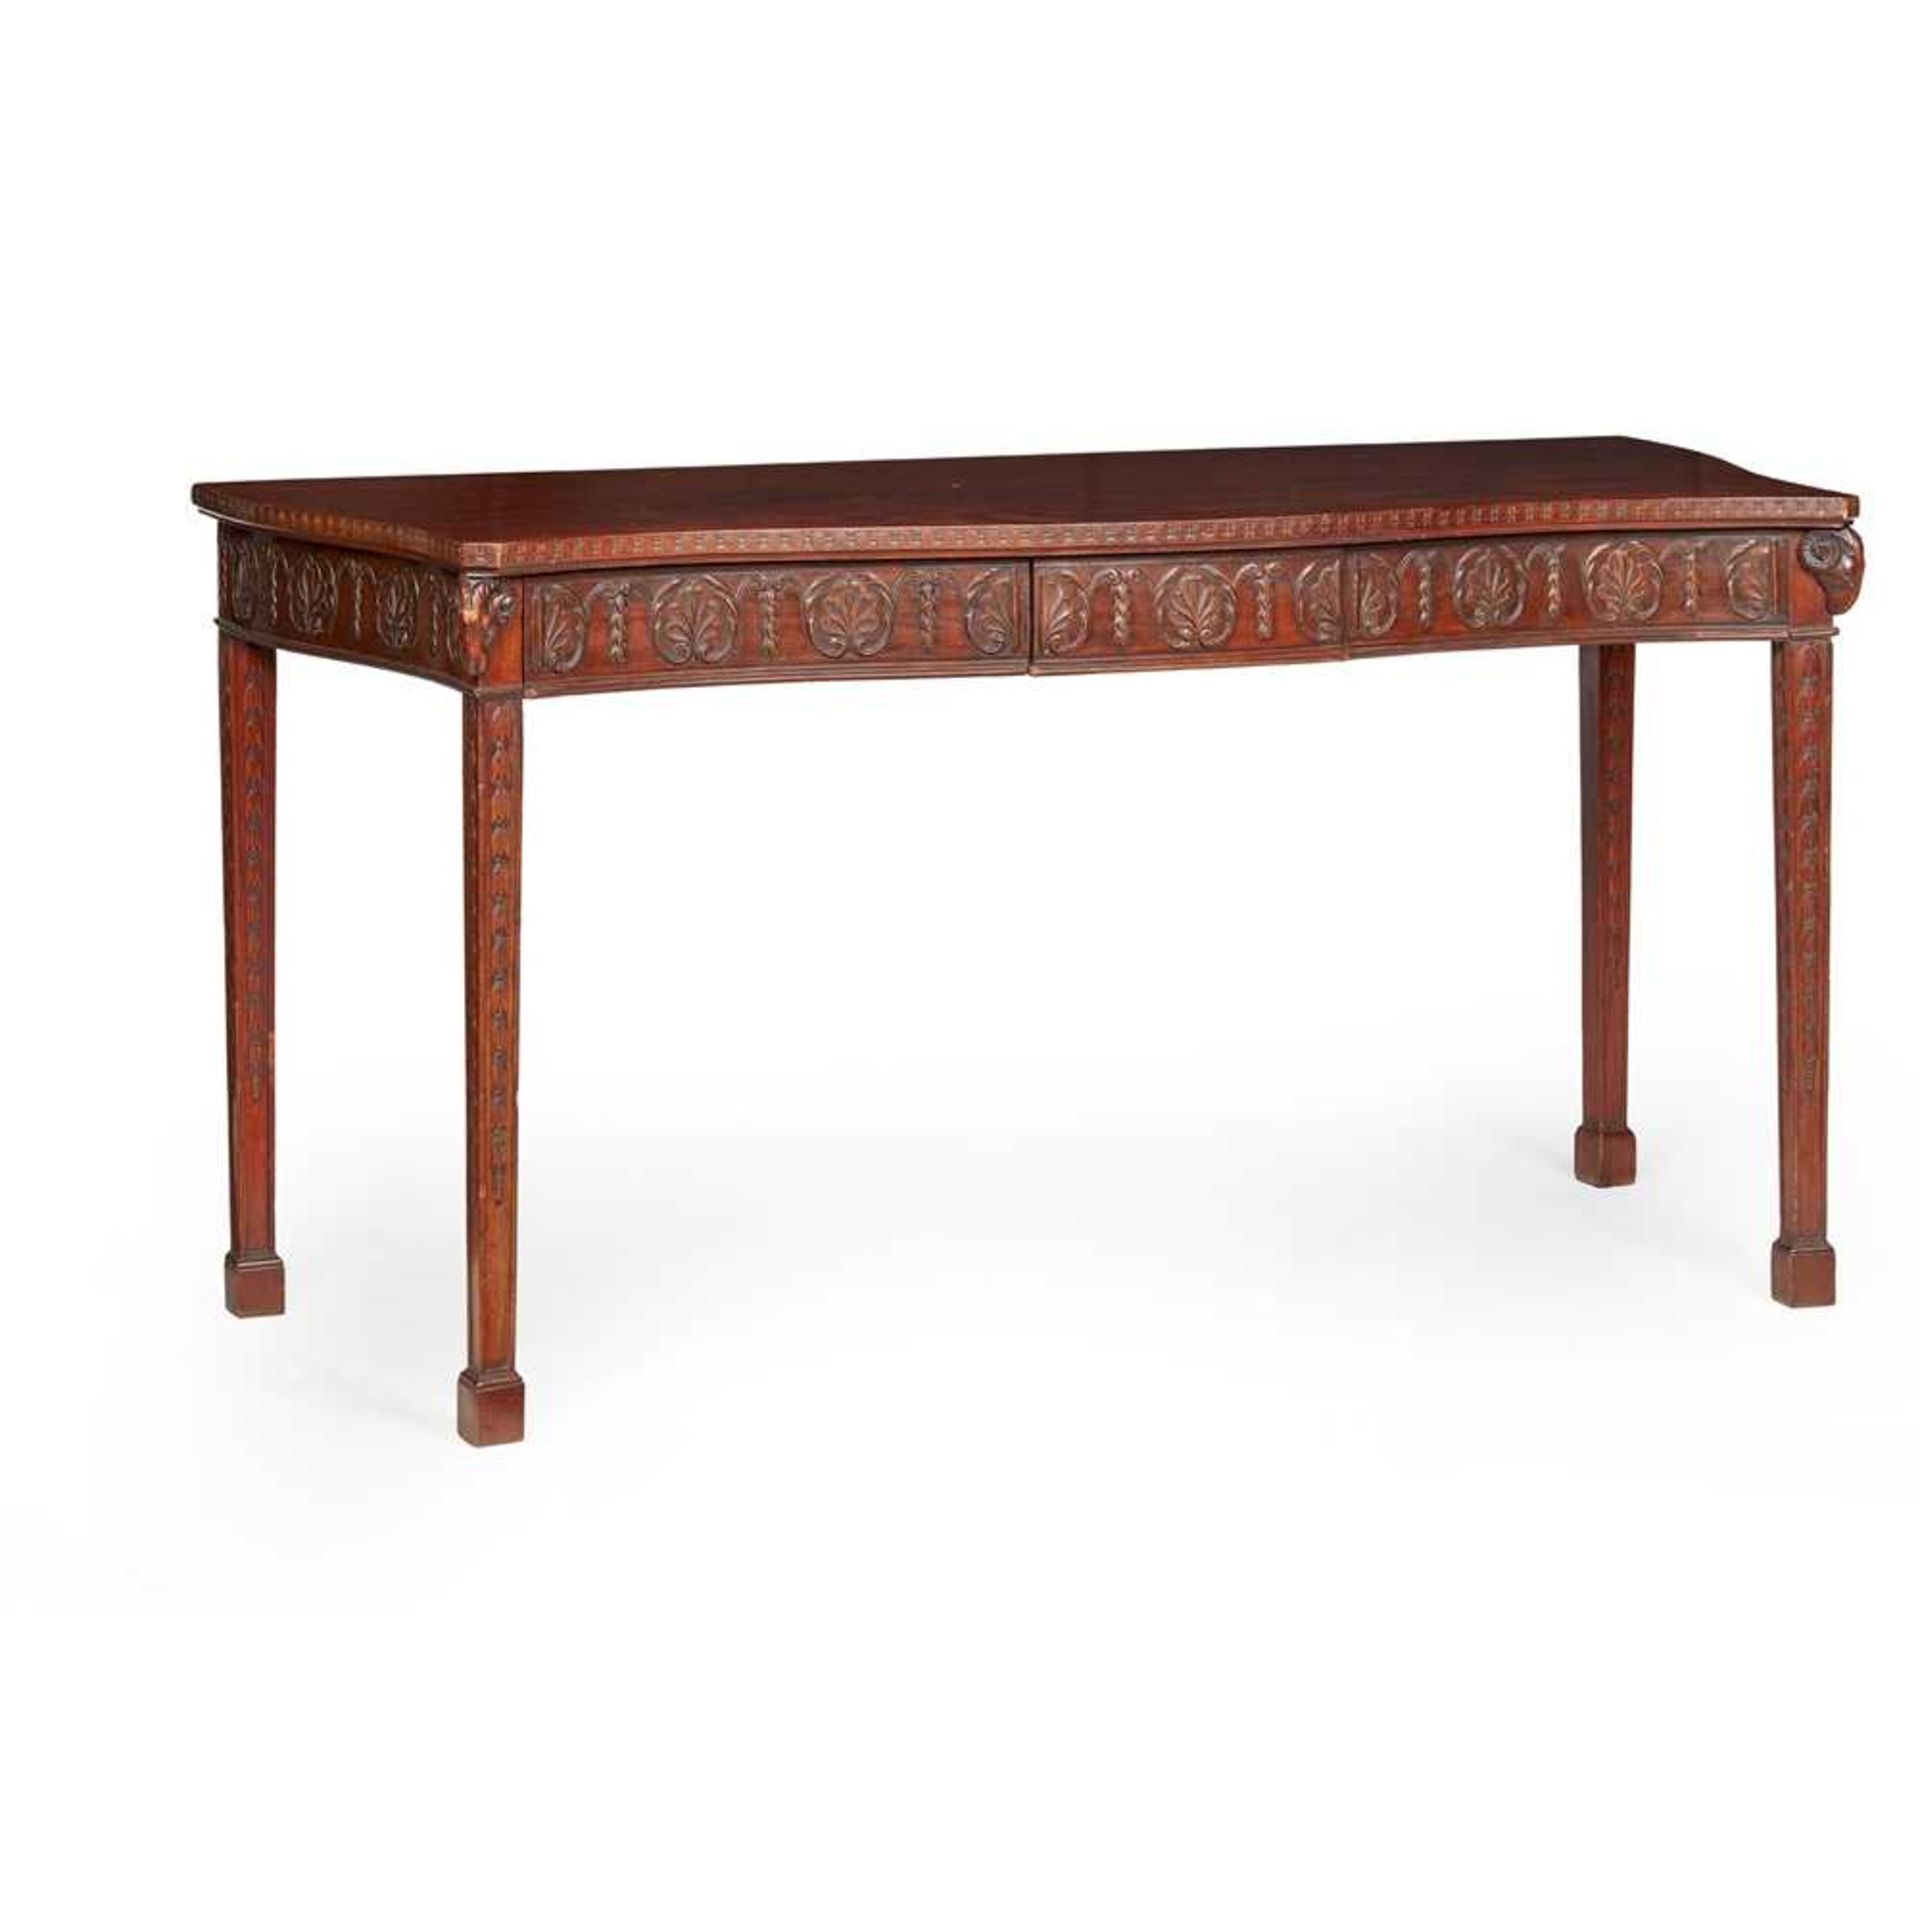 GEORGIAN STYLE MAHOGANY SERPENTINE SERVING TABLE, IN THE MANNER OF ROBERT ADAM 20TH CENTURY